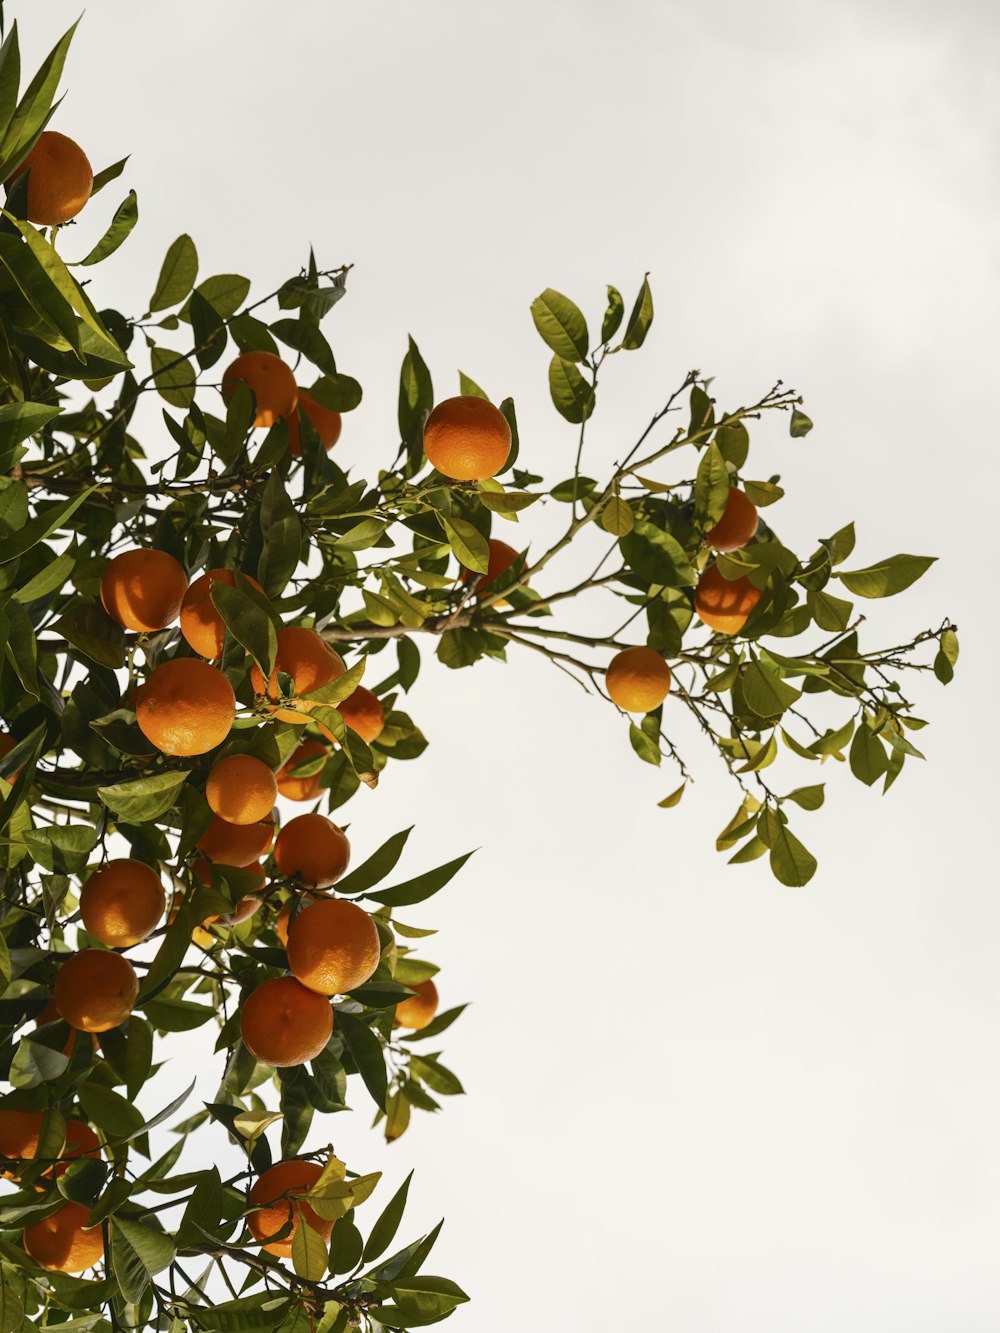 a tree filled with lots of oranges under a cloudy sky